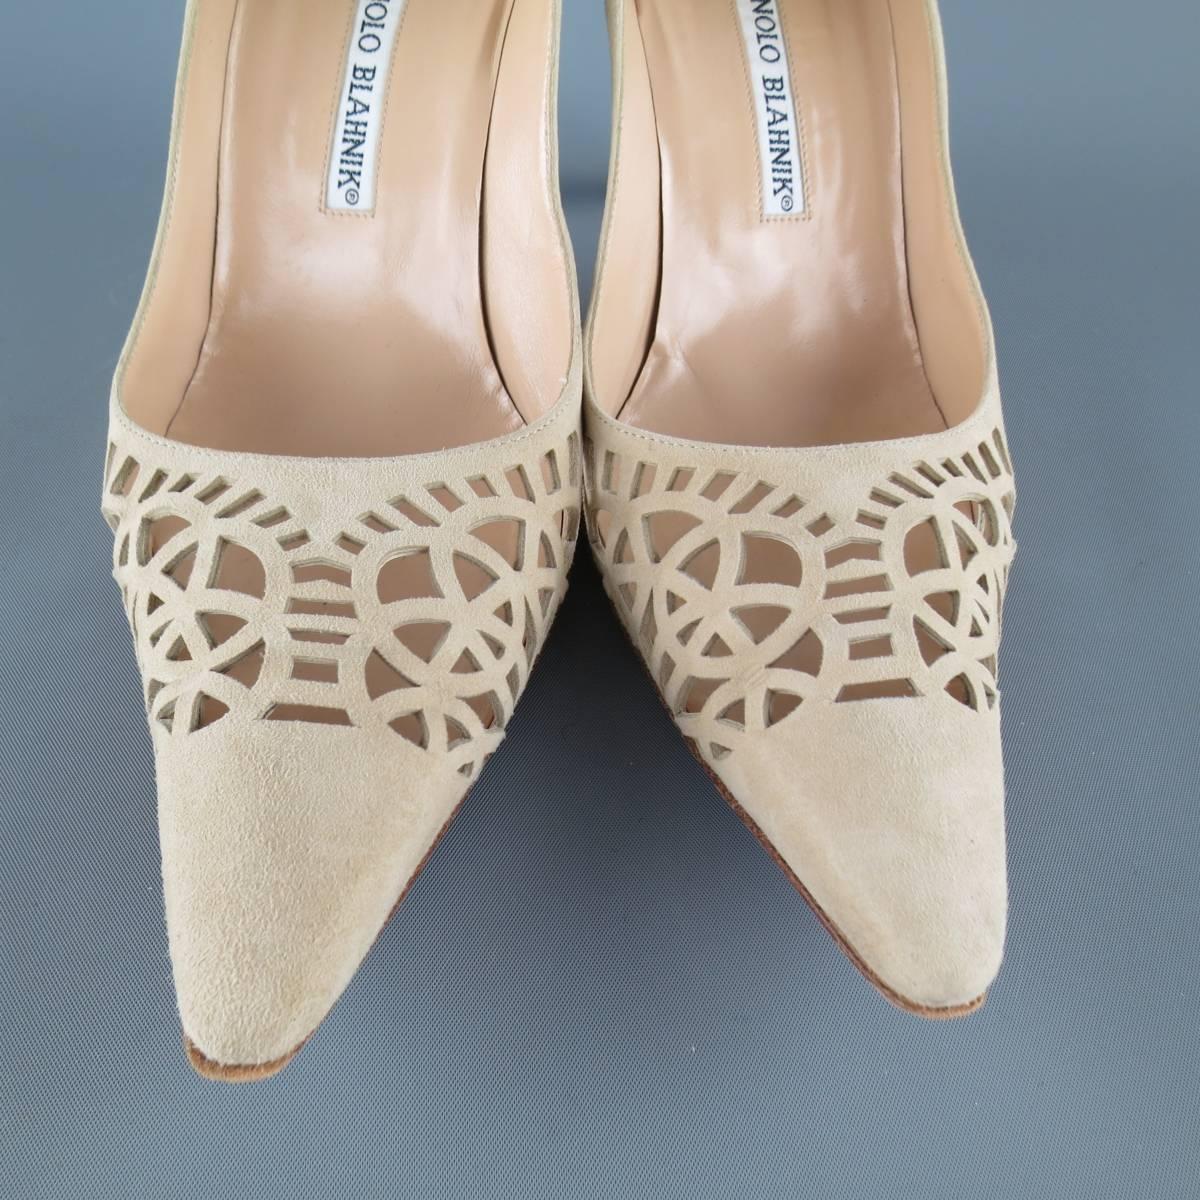 MANOLO BLAHNIK pumps come in beige suede and feature a pointed toe with cutout pattern detail and covered stiletto heel Wear throughout. Made in Italy.
 
Good Pre-Owned Condition.
Marked: IT 37.5
 
Heel: 3.25 in.


Web ID: 83244 